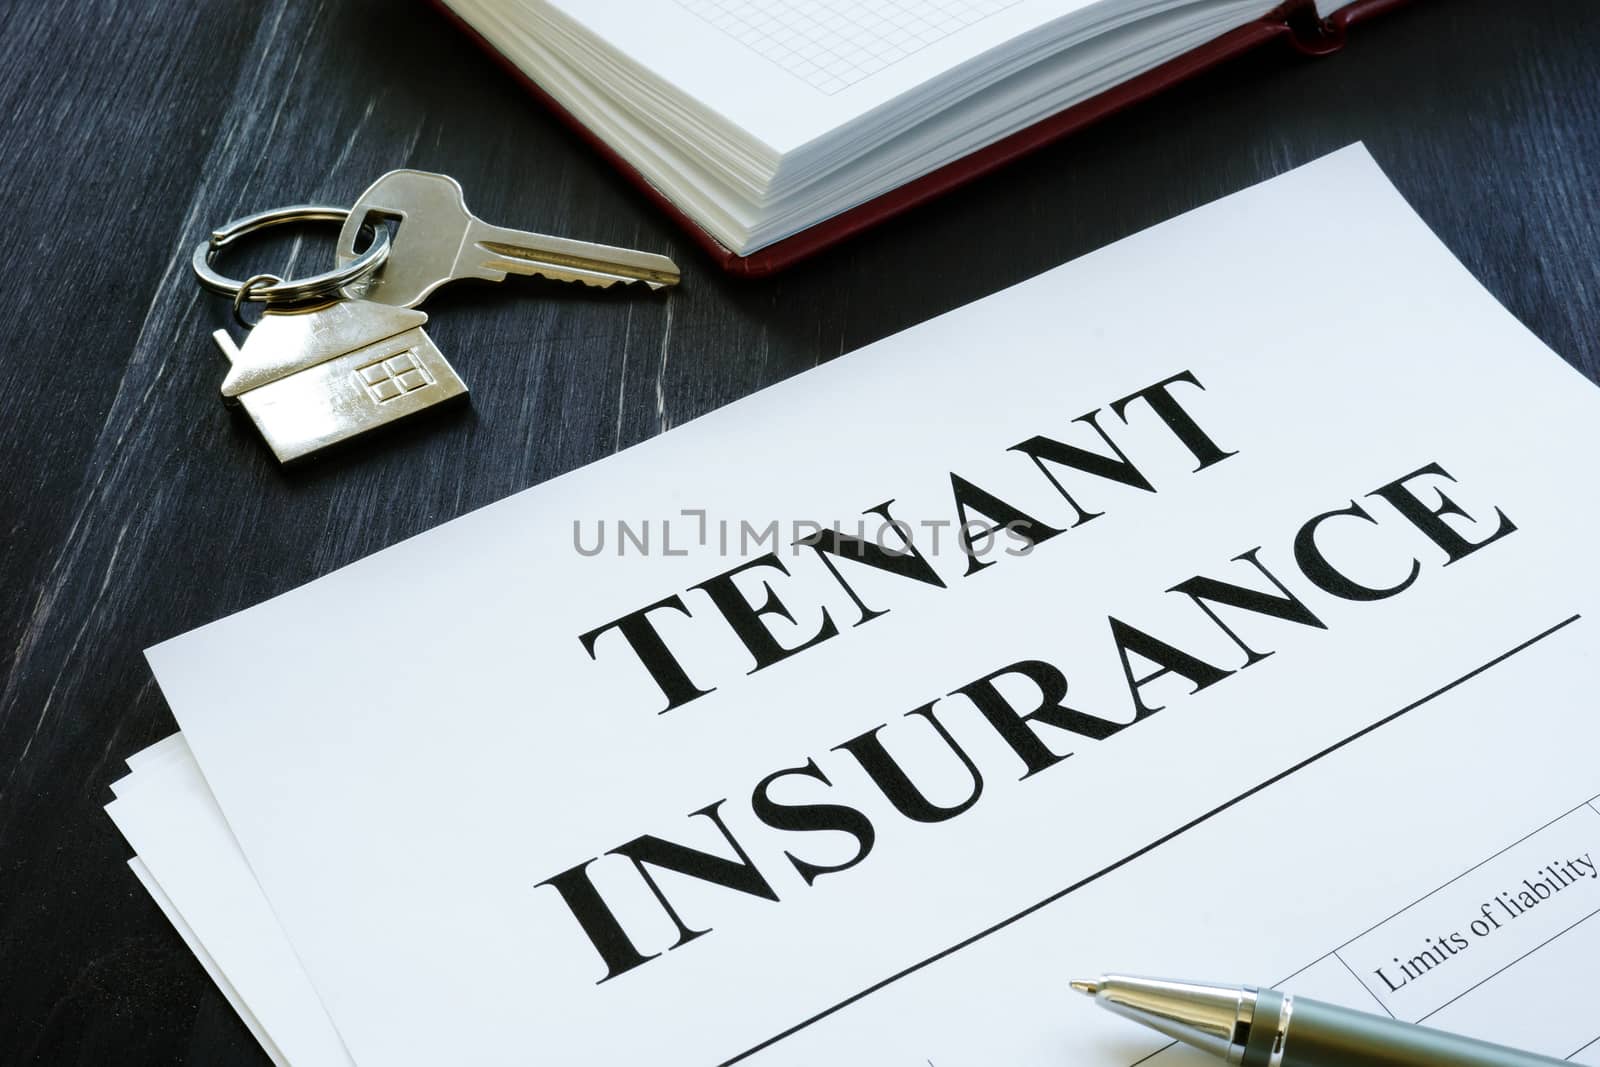 Tenant insurance policy, key and pen for signing.